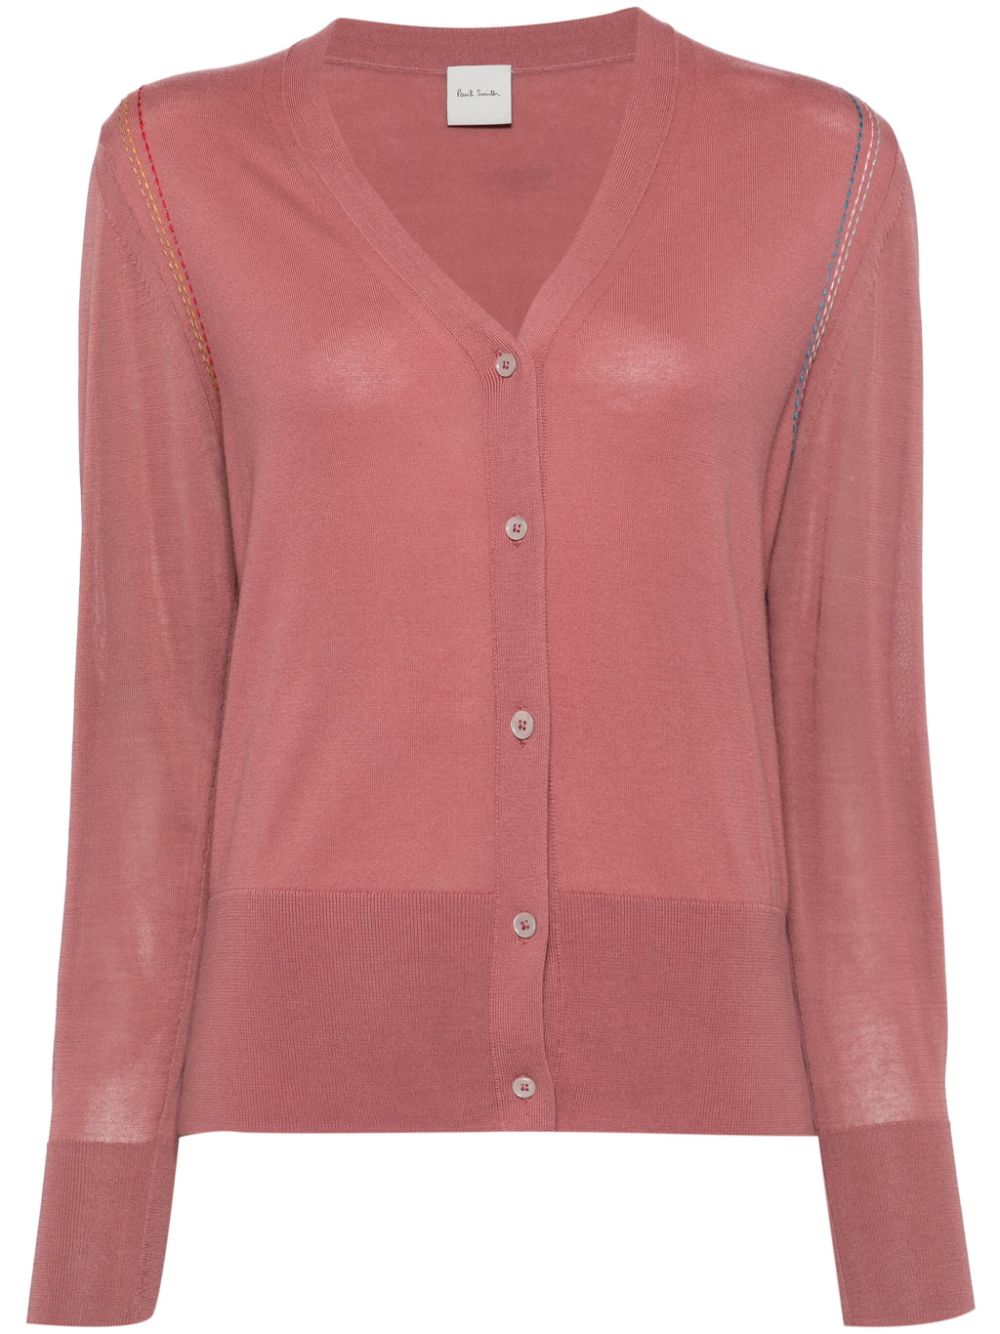 Paul Smith contrast-stitched cardigan - Pink von Paul Smith